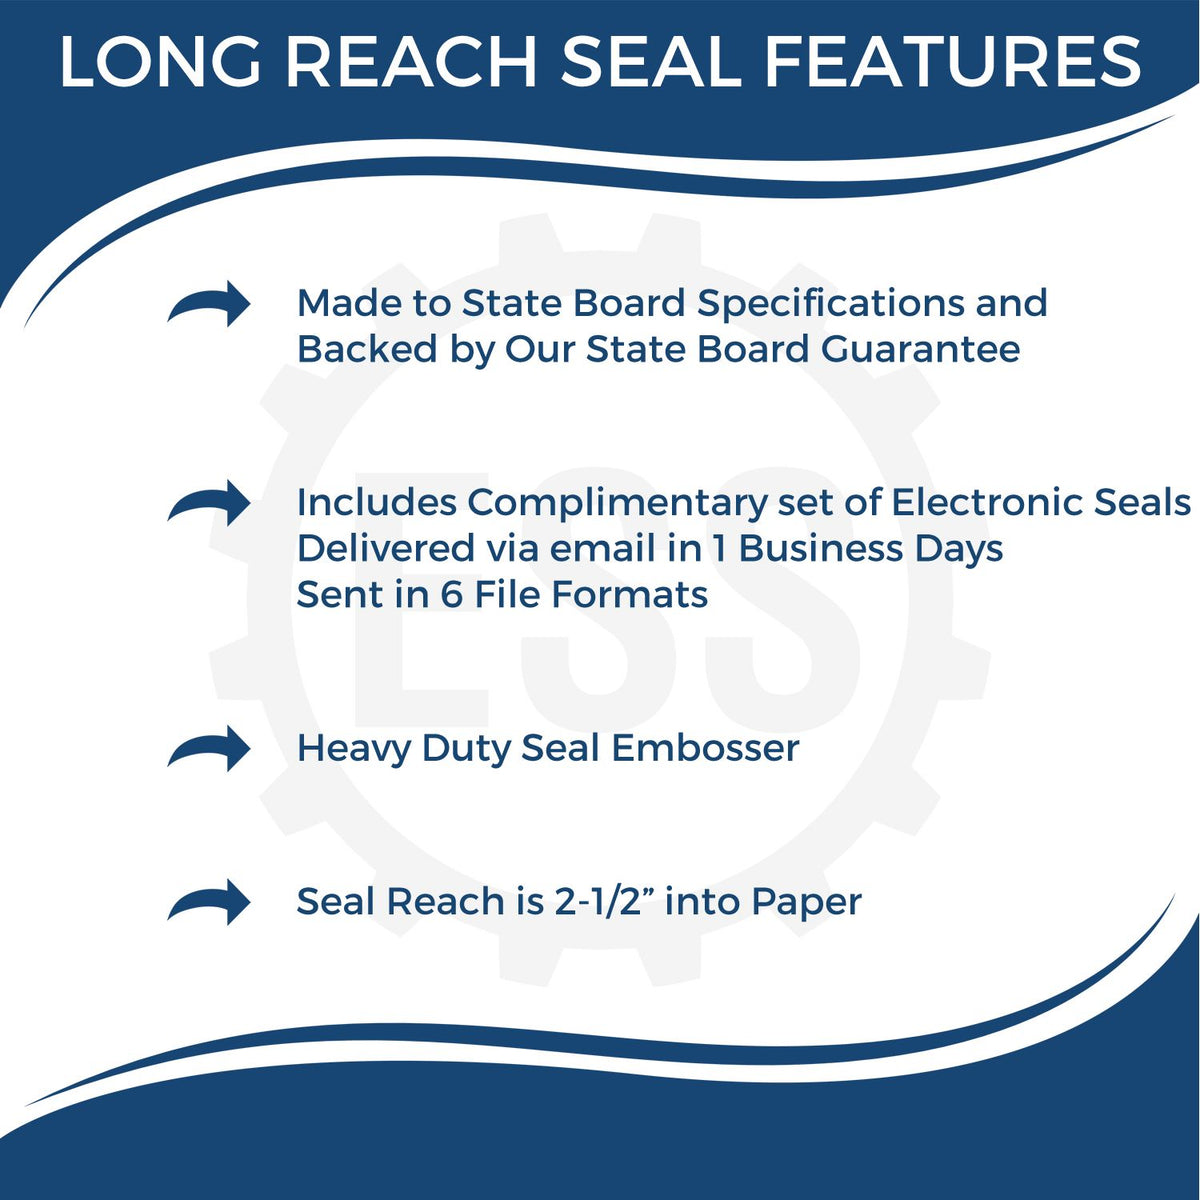 A picture of an infographic highlighting the selling points for the Long Reach New Hampshire PE Seal